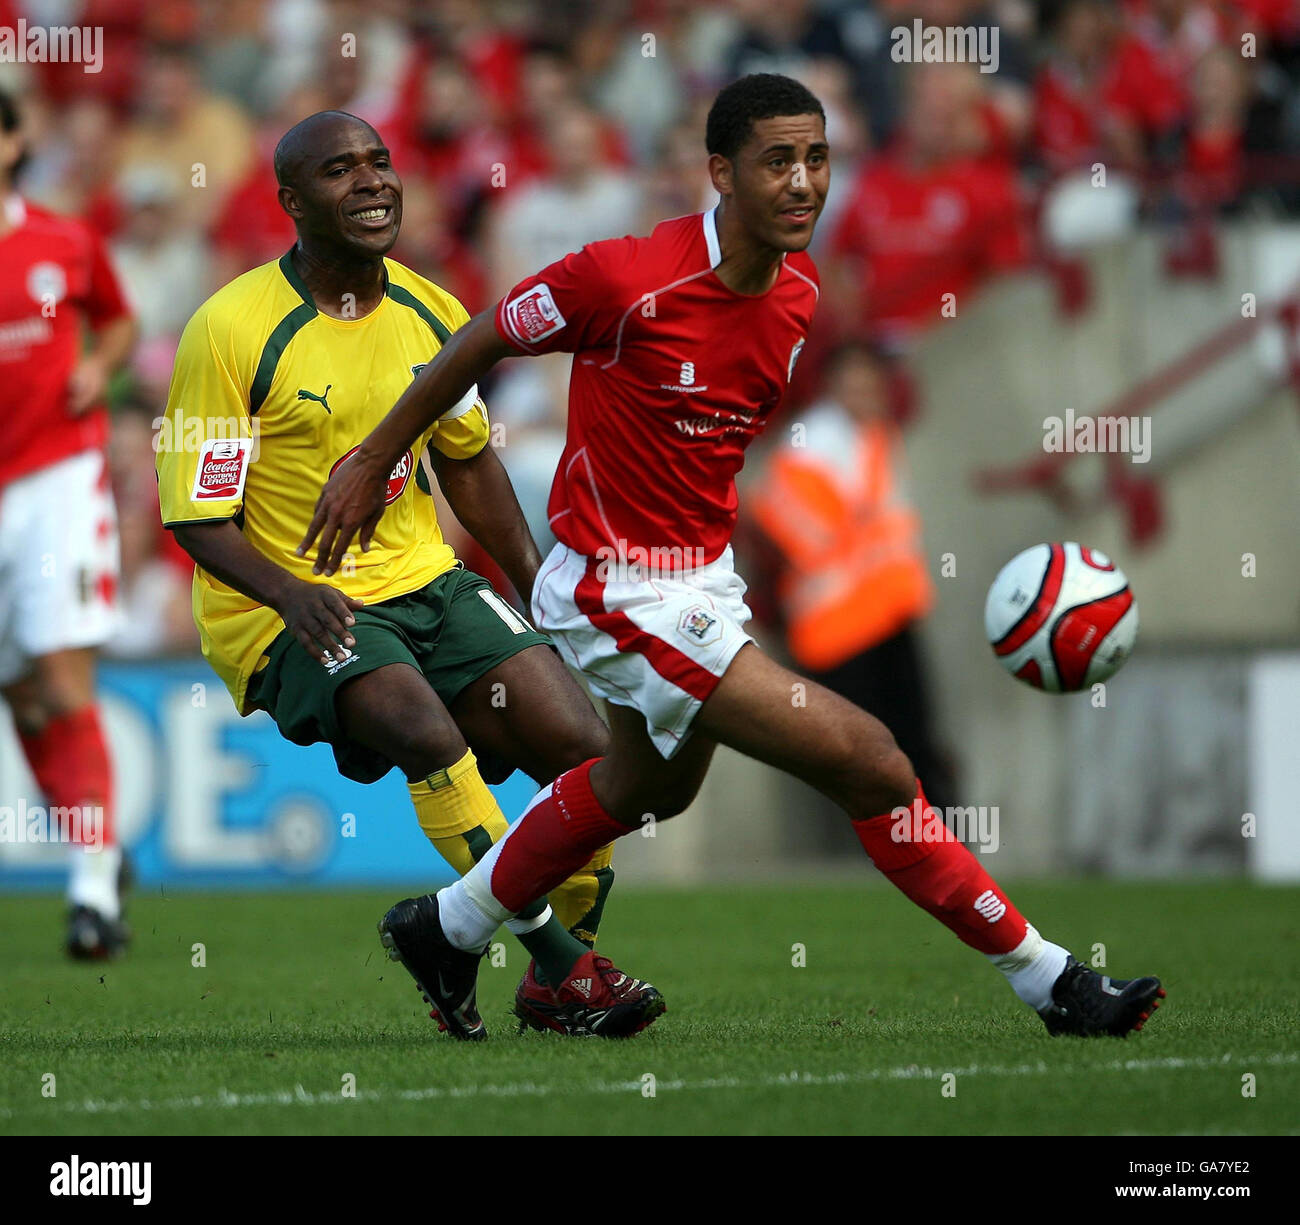 Barnsley's Lewin Nyatanga and Plymouth Argyle's Barry Hayles in action during the Coca-Cola Football League Championship match at the Oakwell Ground, Barnsley. Stock Photo